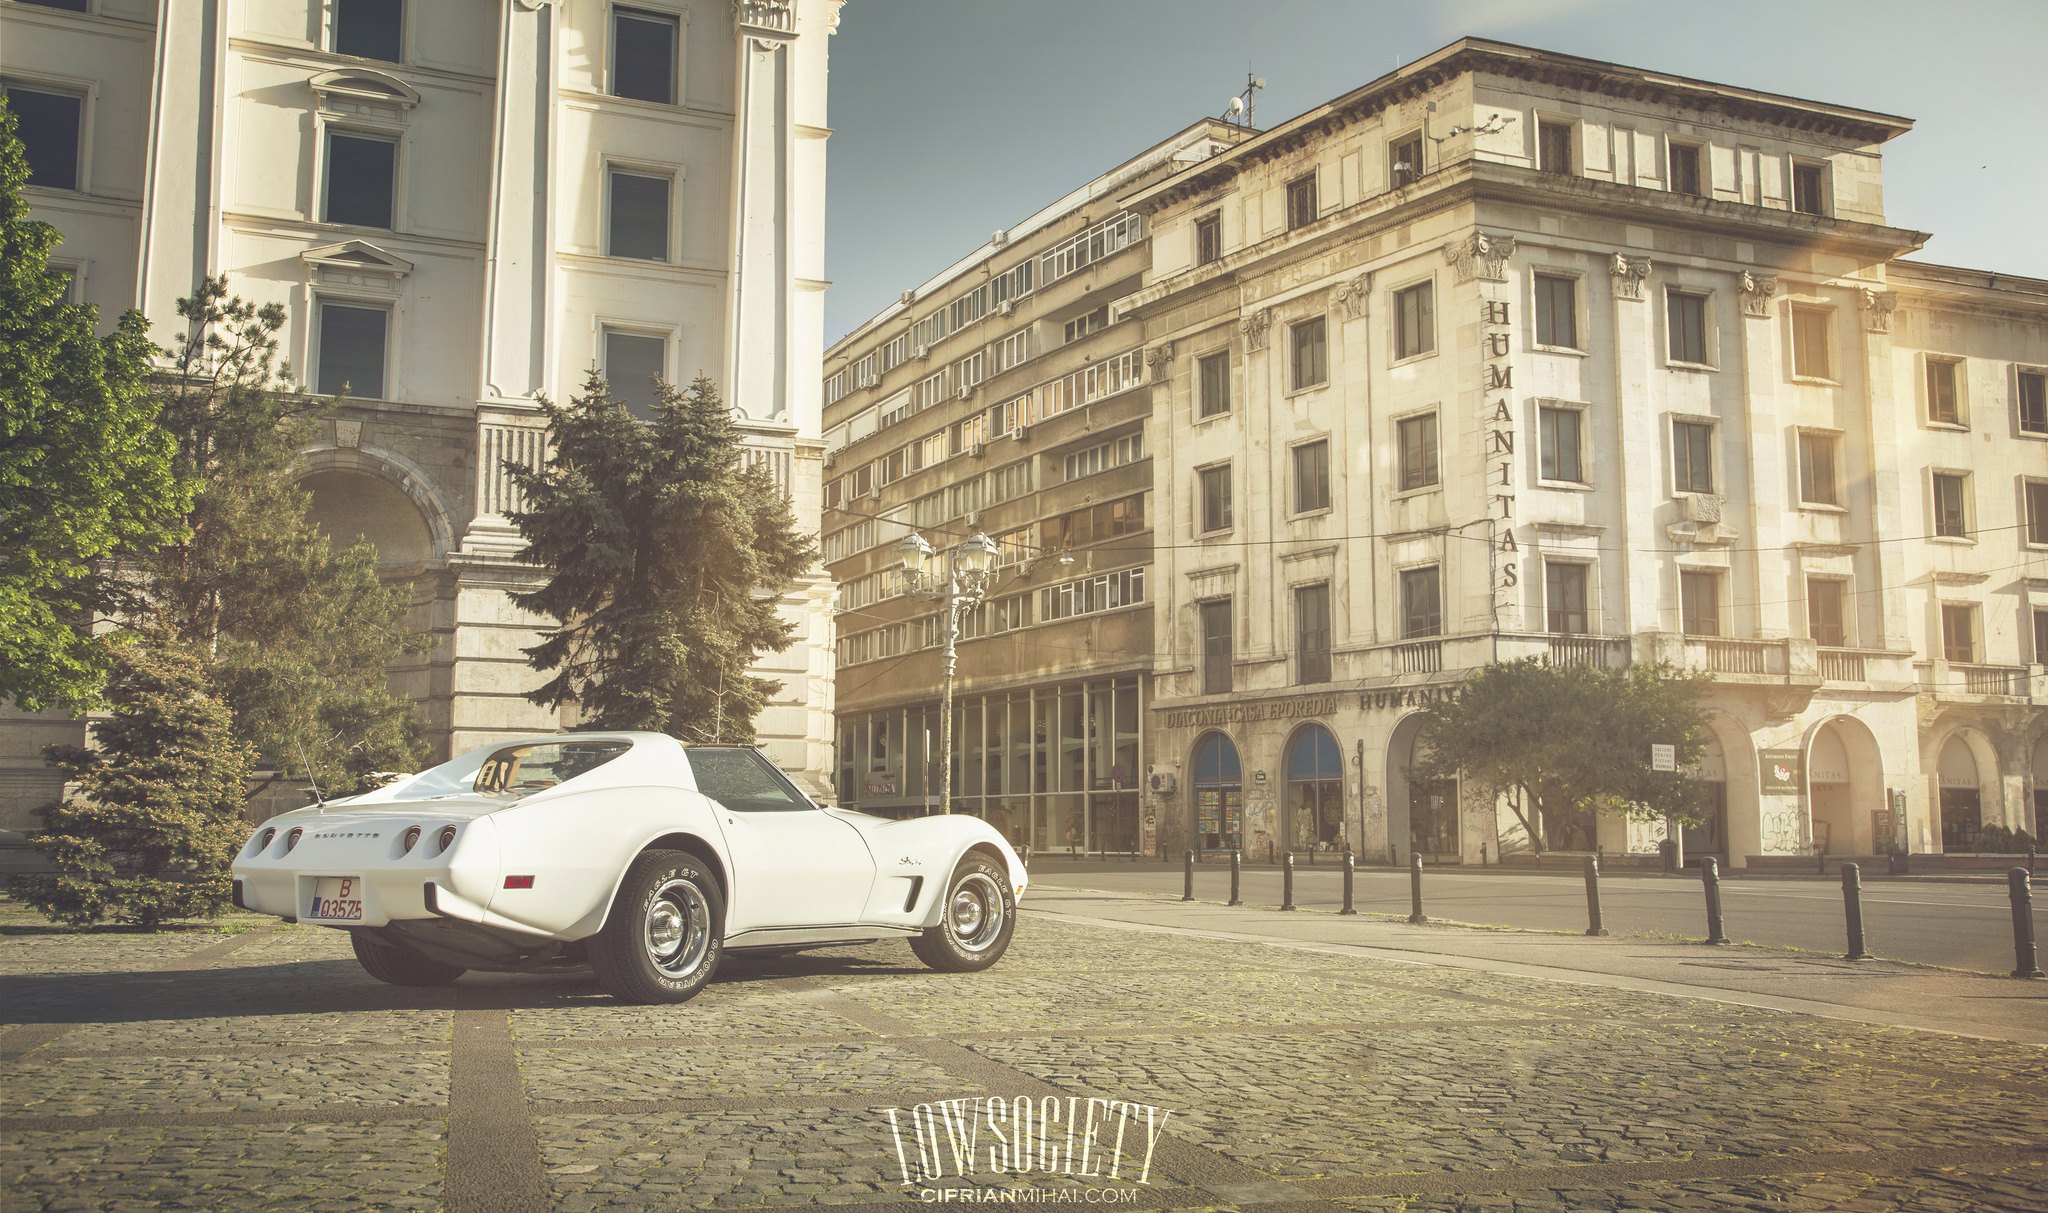 White Chevy Corvette on Goodyear Tires  - Photo by Ciprian Mihai